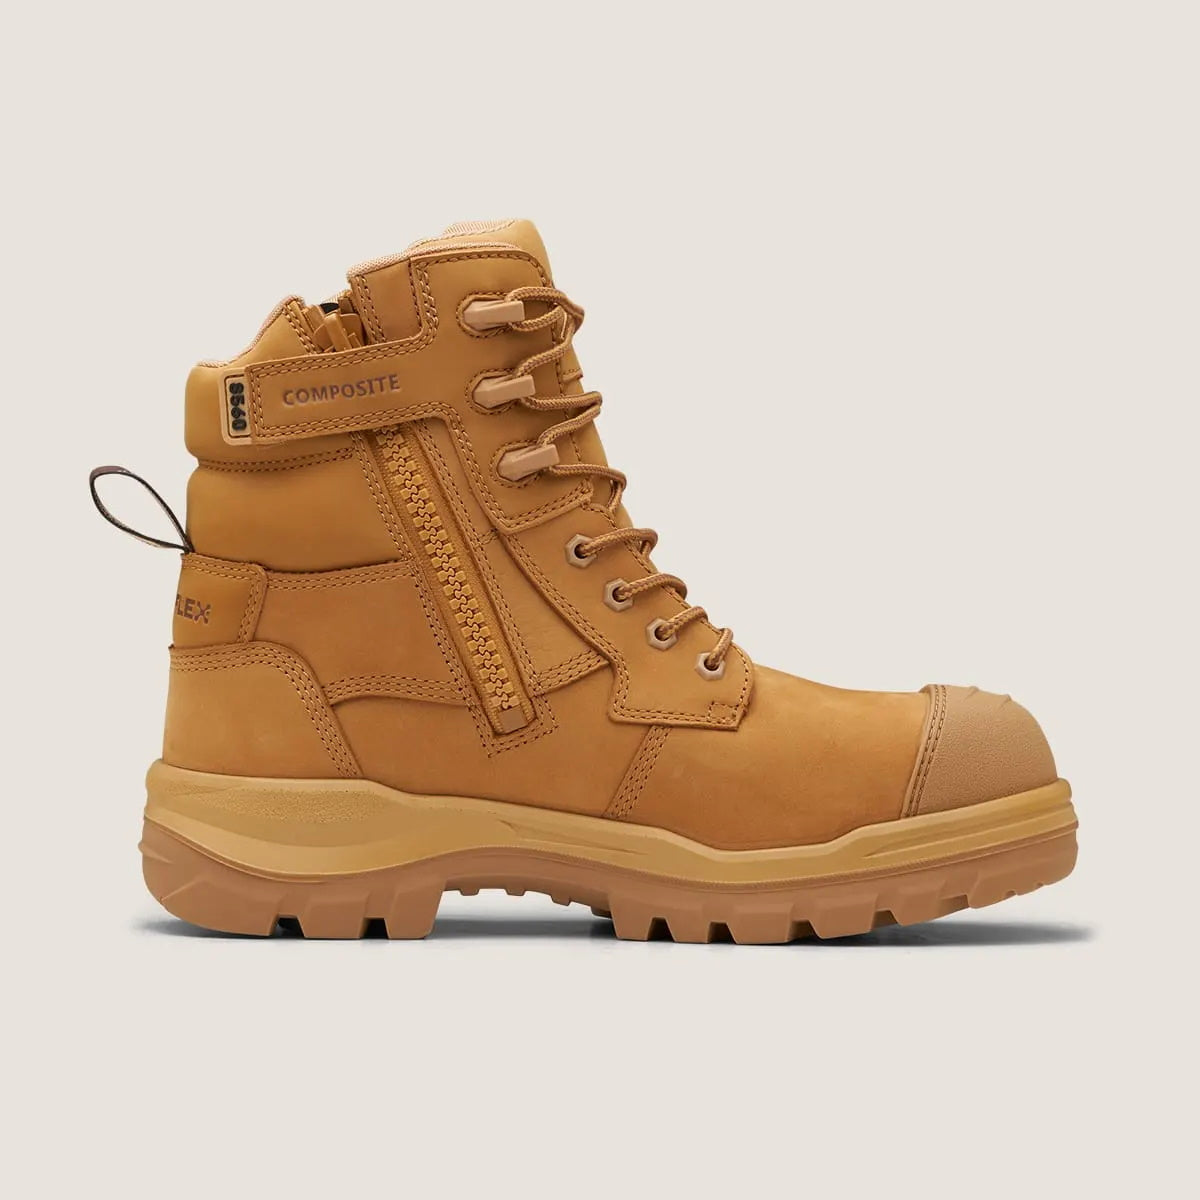 Side view of Blundstone 8560 RotoFlex Composite Toe Safety Boot in wheat